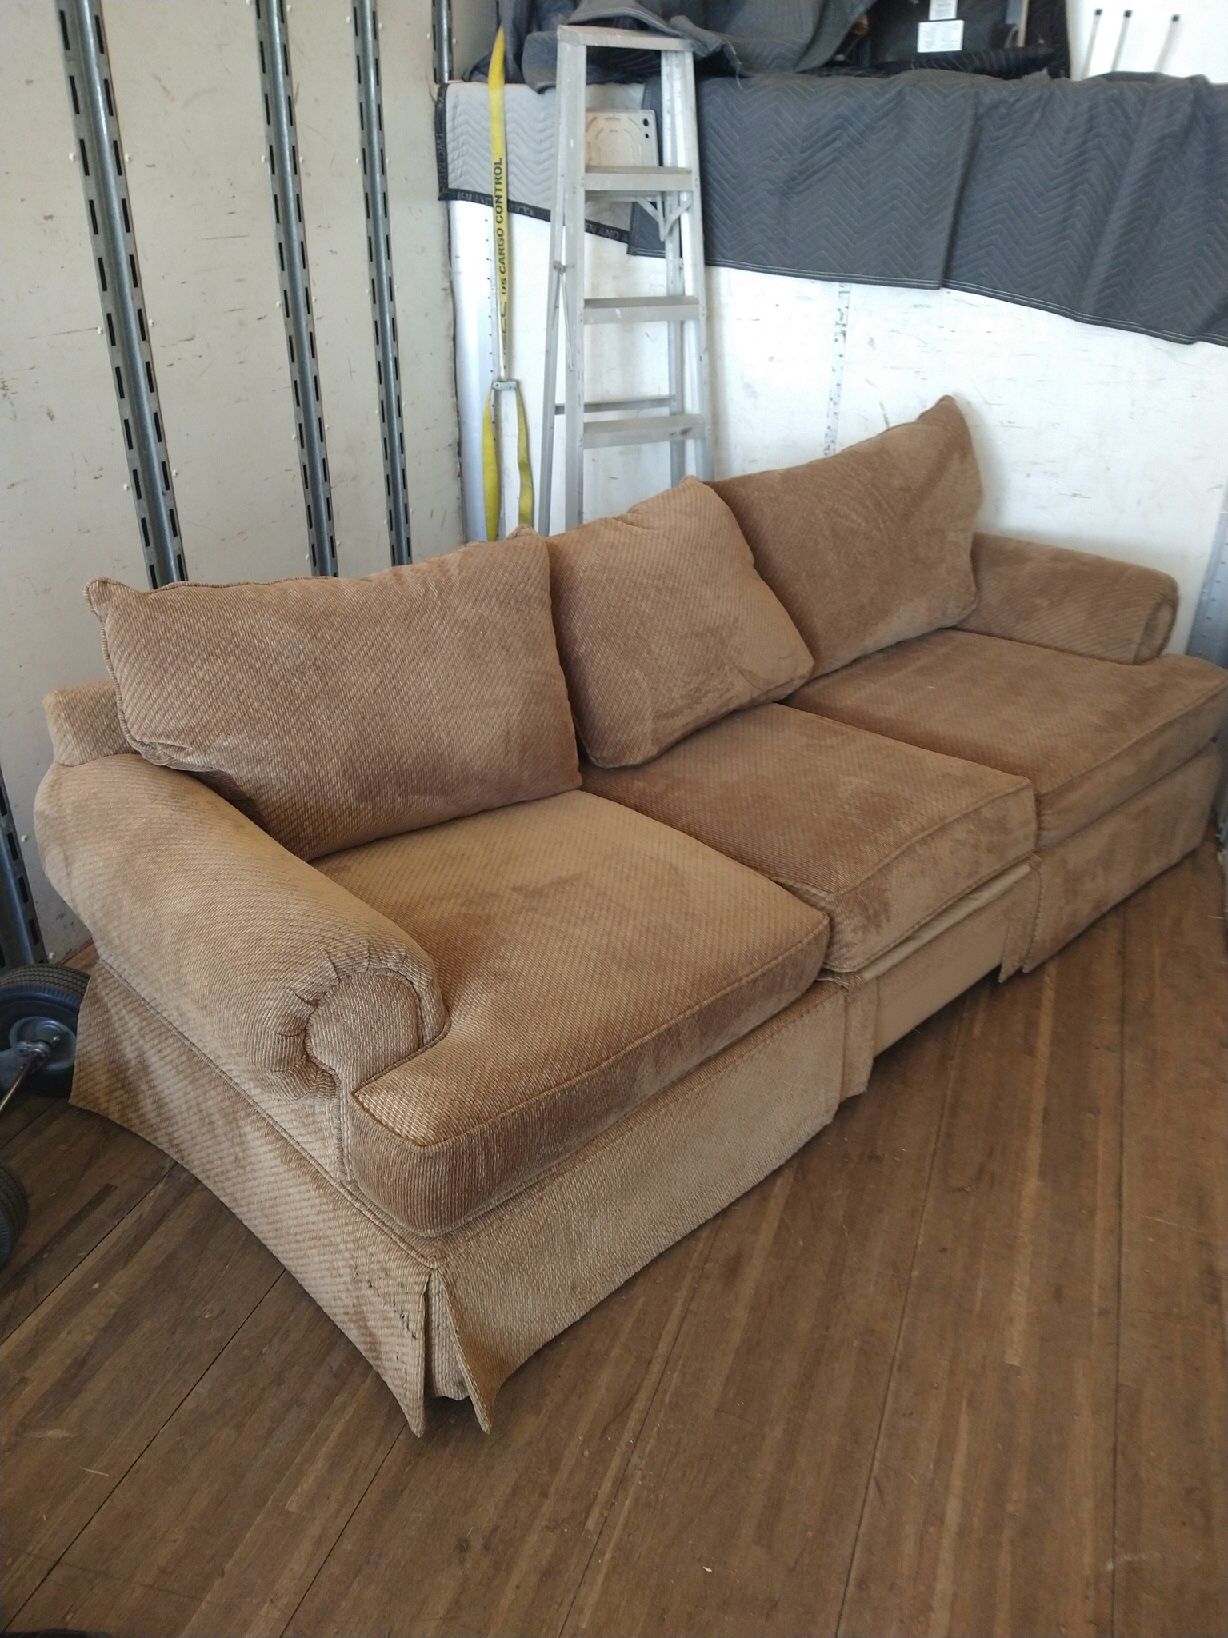 Beautiful Tan Couch